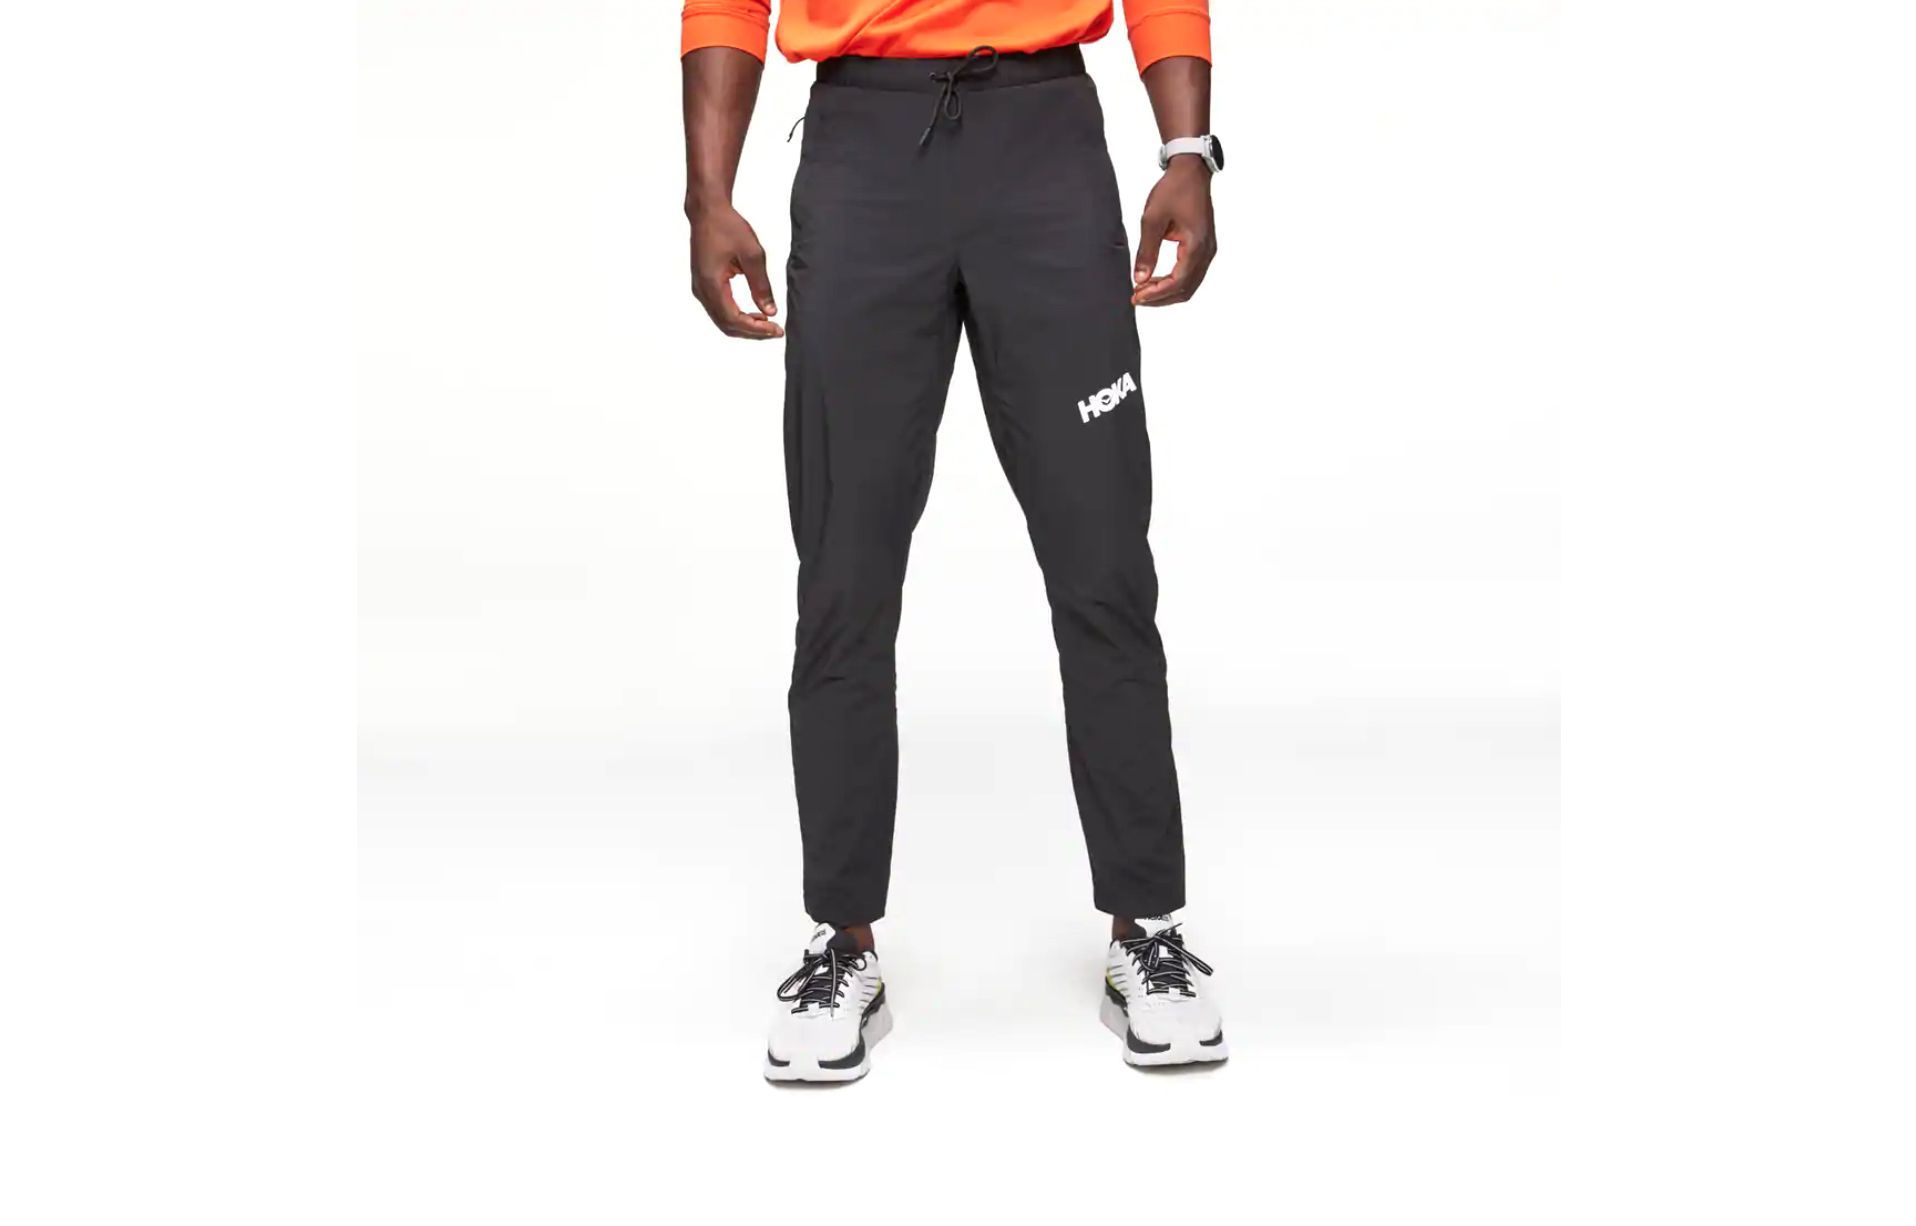 ainr Men Loose Warm Active Running Trousers Casual Pants